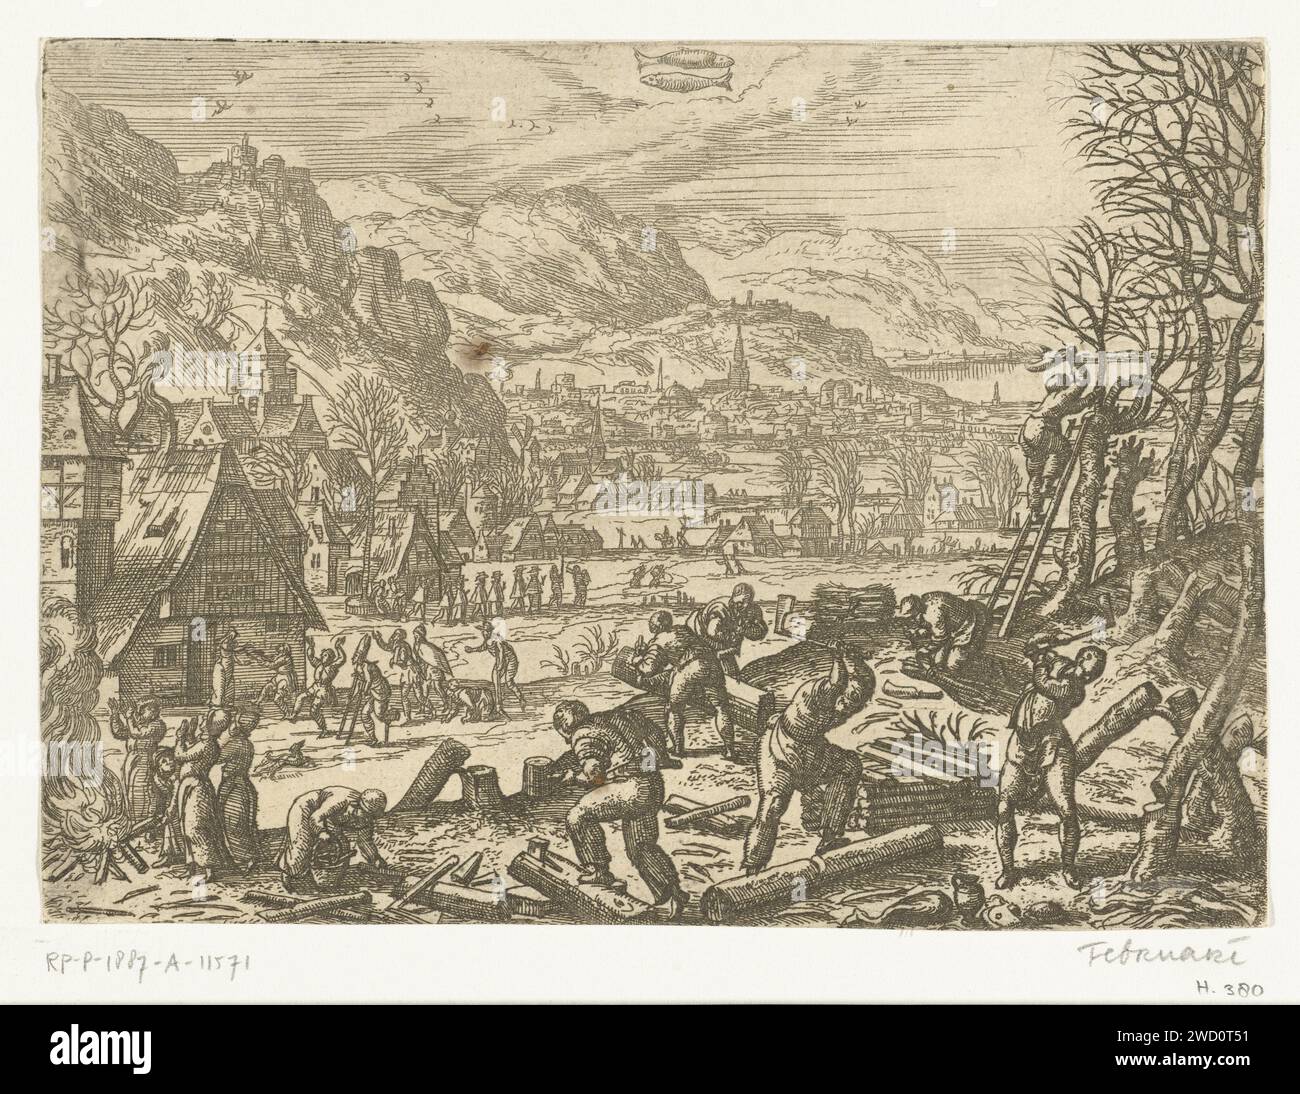 February, Pieter van der Borcht (I), 1545 - 1608 print Winter landscape with winter scenes. February is the Sprokkel month. In the foreground, dead wood is left of the winter minced meat and collected. People warm themselves on a home -made fire. A procession is underway in the background while some beggars dressed up the houses for alms, a variation on carnival, fasting evening or headline day. In the middle of the constellation fishing. In this series of the twelve months, every month is depicted with the human activities, her climatic characteristics and its constellation that are typical o Stock Photo